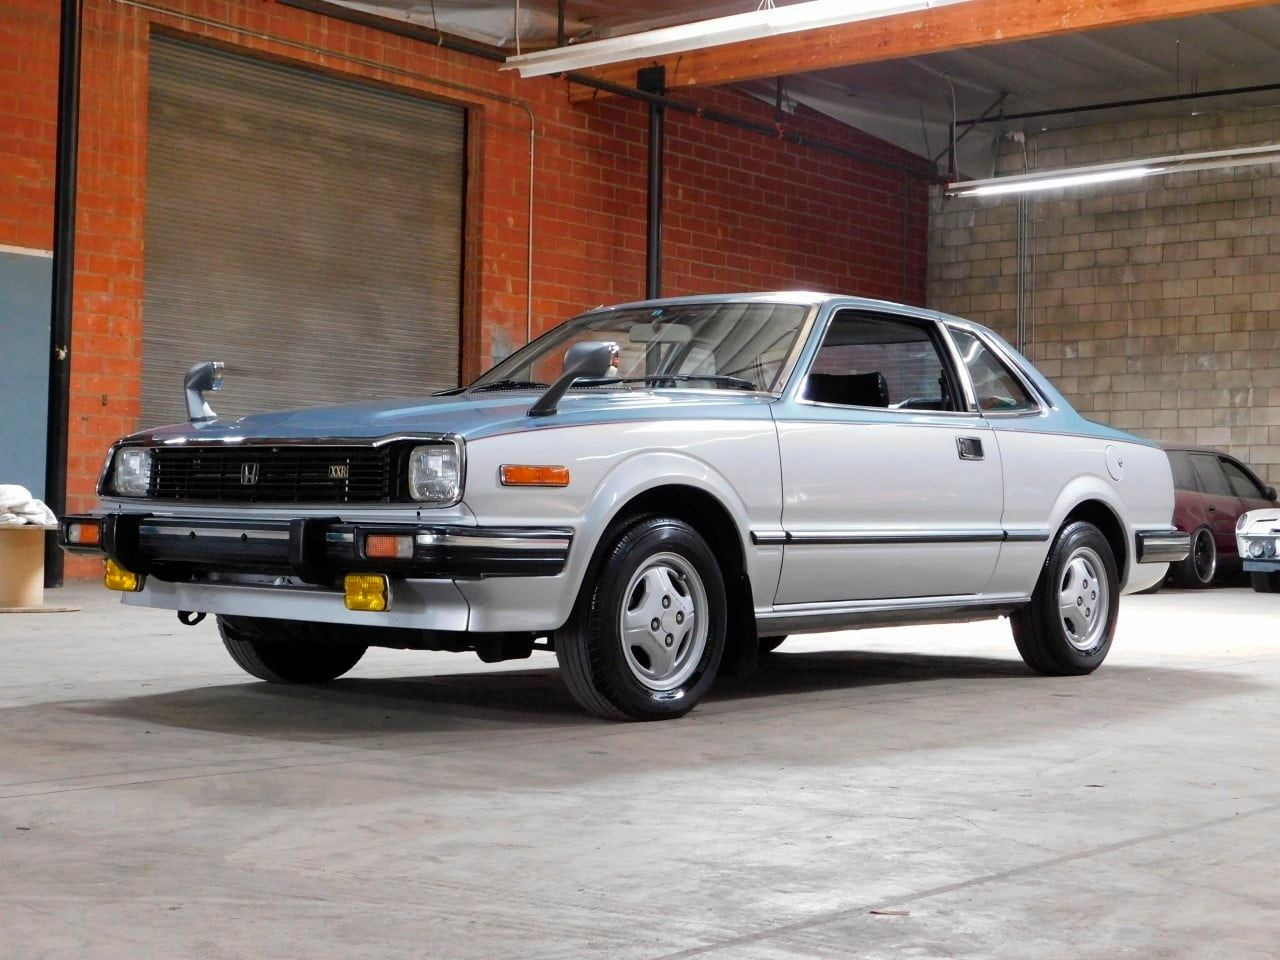 1982 Honda Prelude With Fender Mirrors